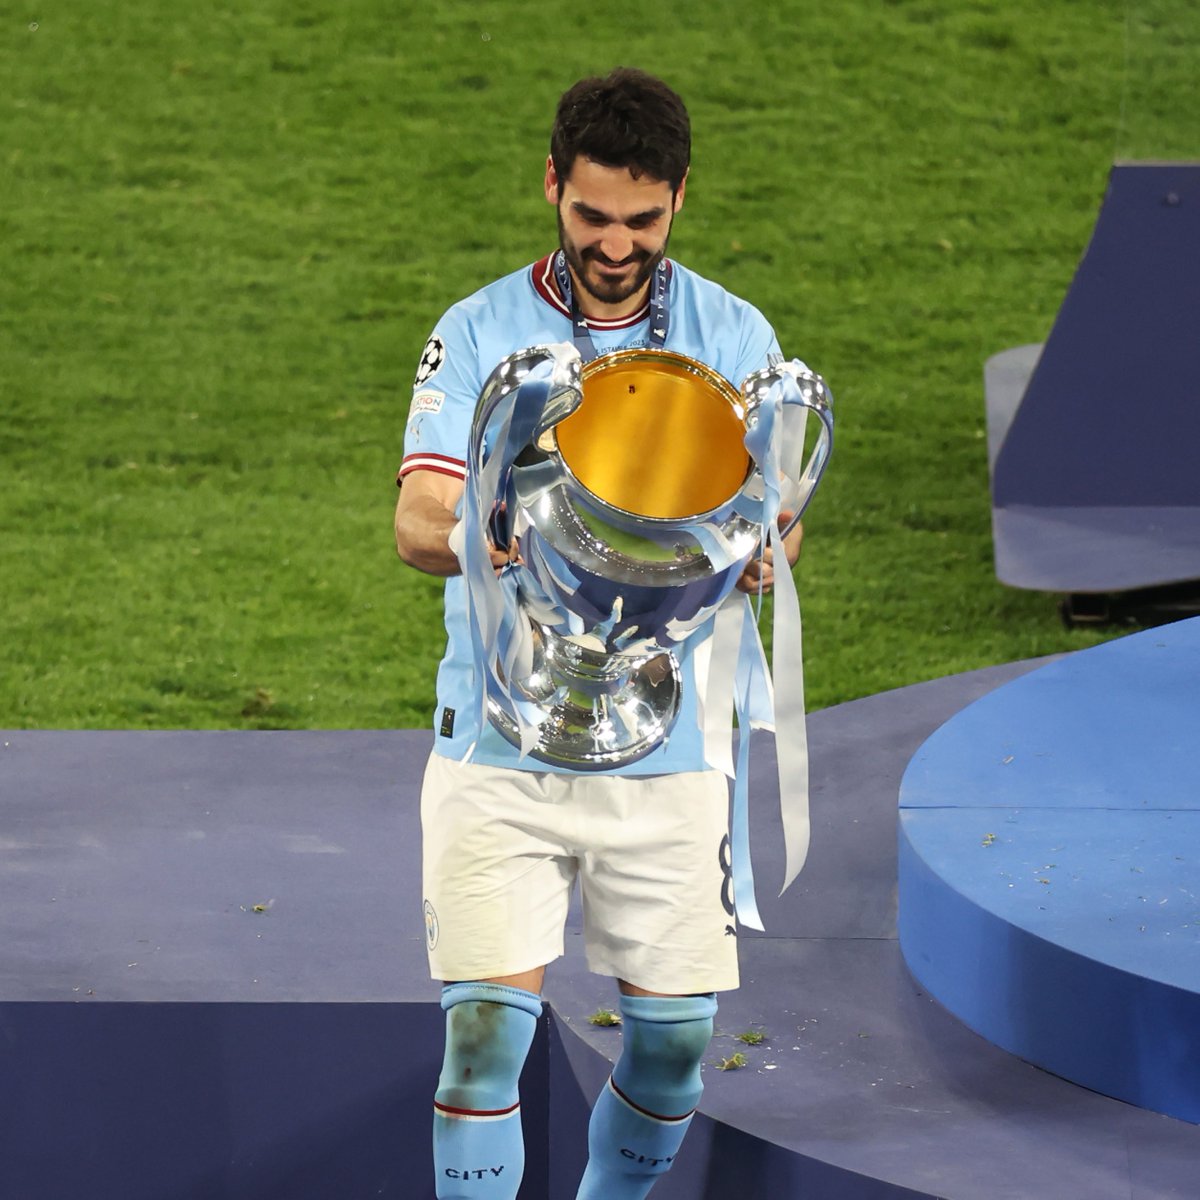 Our #PL final-day hero.
Our treble-winning captain.
Our #UCL final-winning captain.
Our first signing of the Pep Guardiola era.
Our Manchester derby #FACup final hero.

304 Apps. 60 Goals. 40 Assists. 14 Honours.

Our @IlkayGuendogan. Thank you! 💙